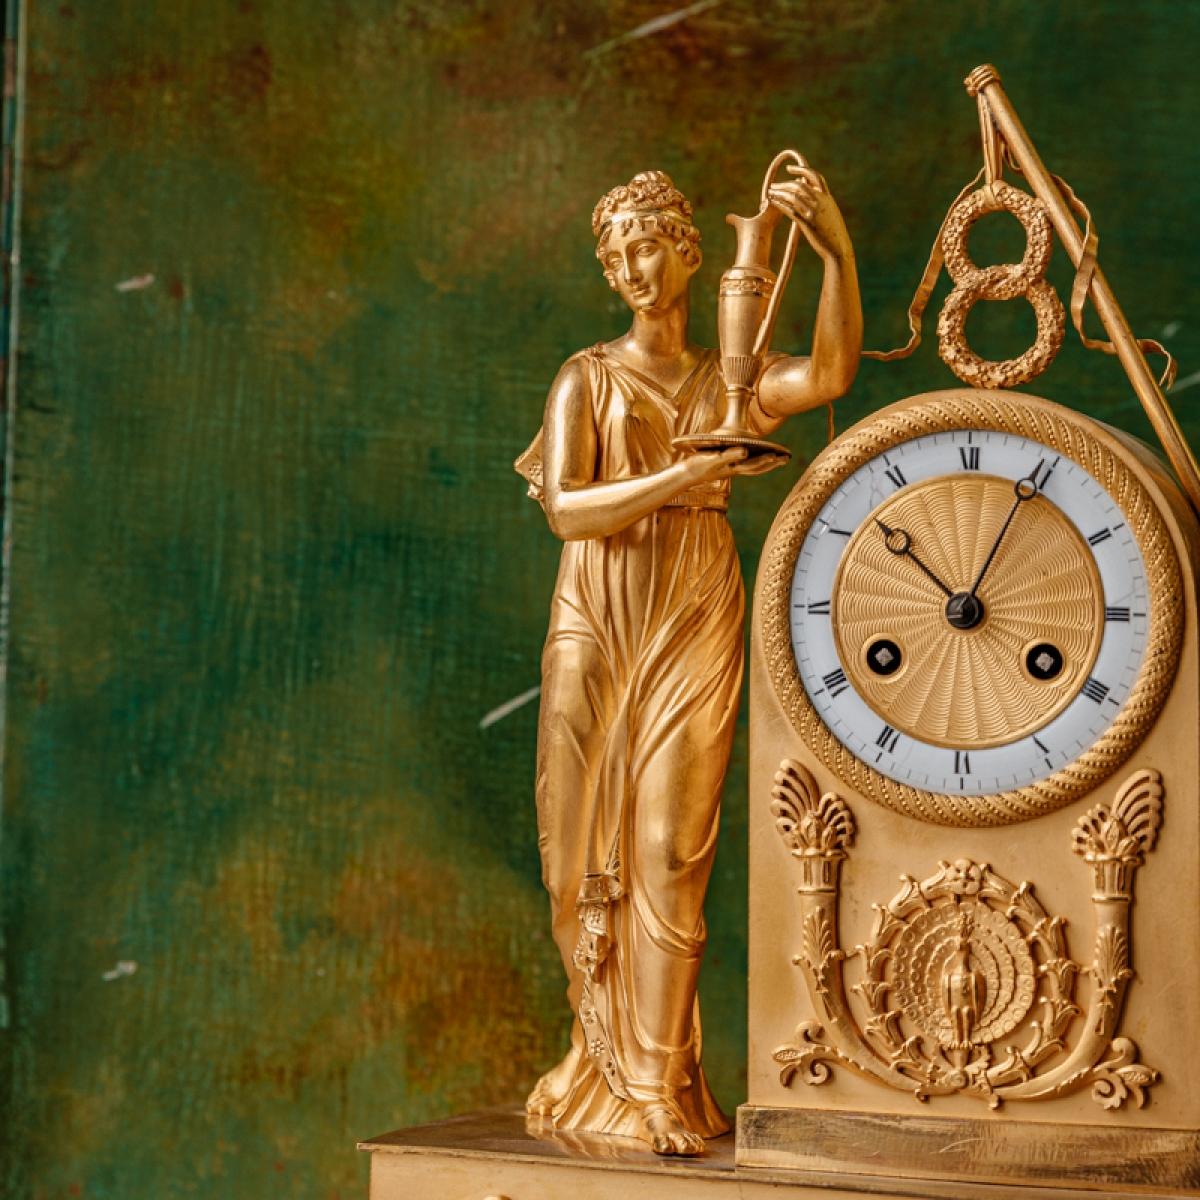 Gilded bronze clock
The gilding is original. 
The dial is white enamelled and the hours are written in Roman numerals.
Period: Restoration
Dimensions: H: 48,5, D: 12,5, W: 34,5 cm
Bollard type model, it represents the myth of the Goddess Hera.